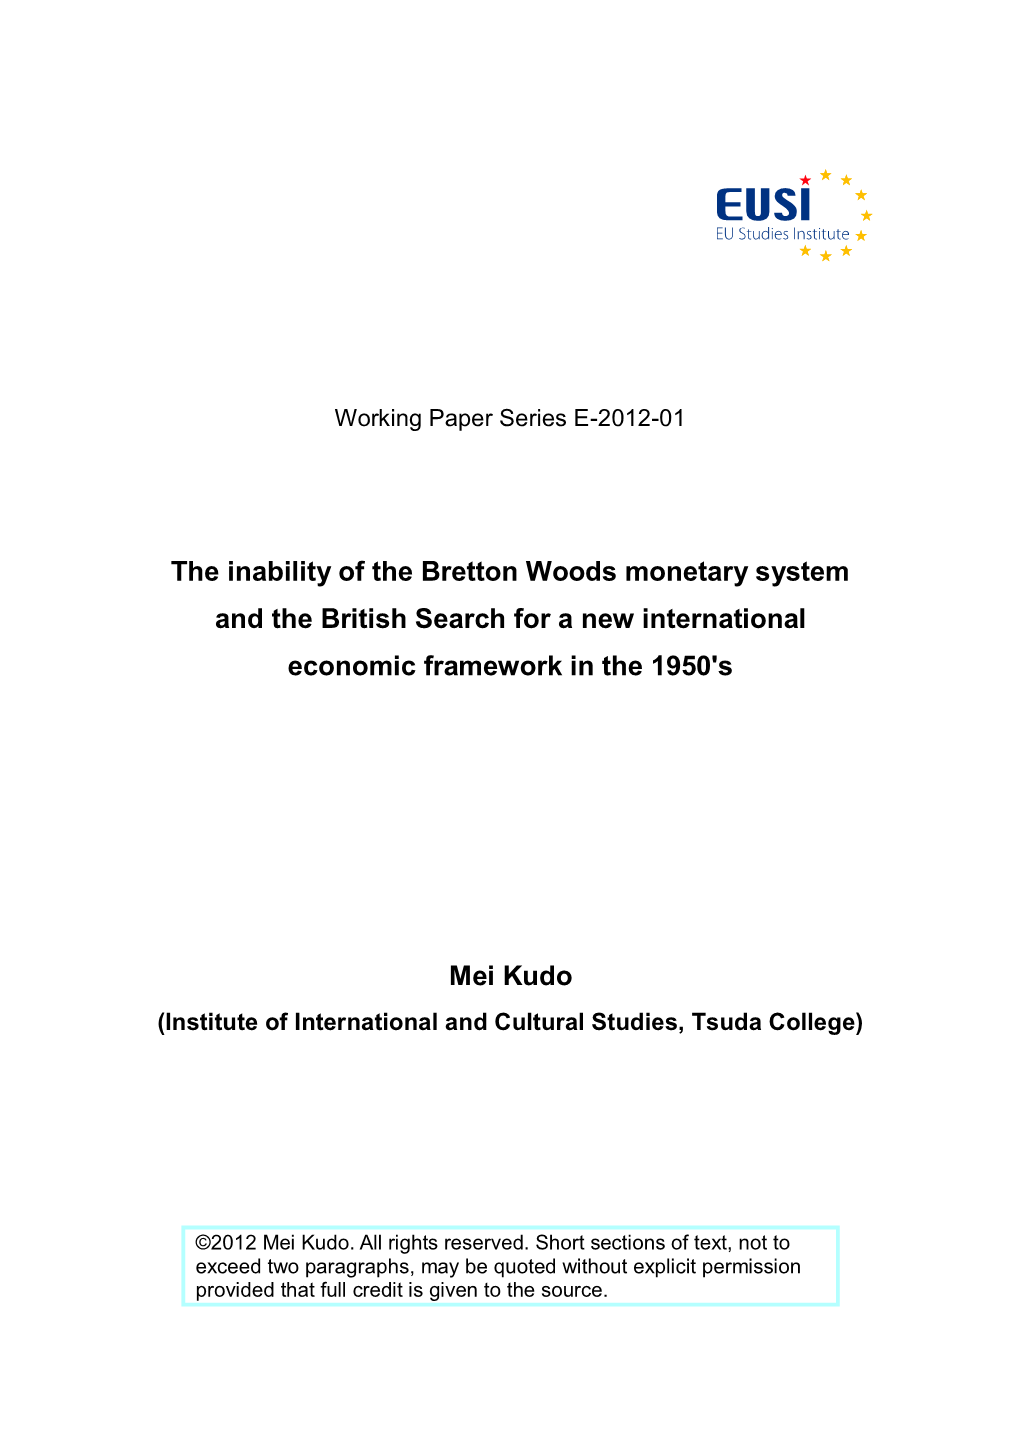 The Inability of the Bretton Woods Monetary System and the British Search for a New International Economic Framework in the 1950'S